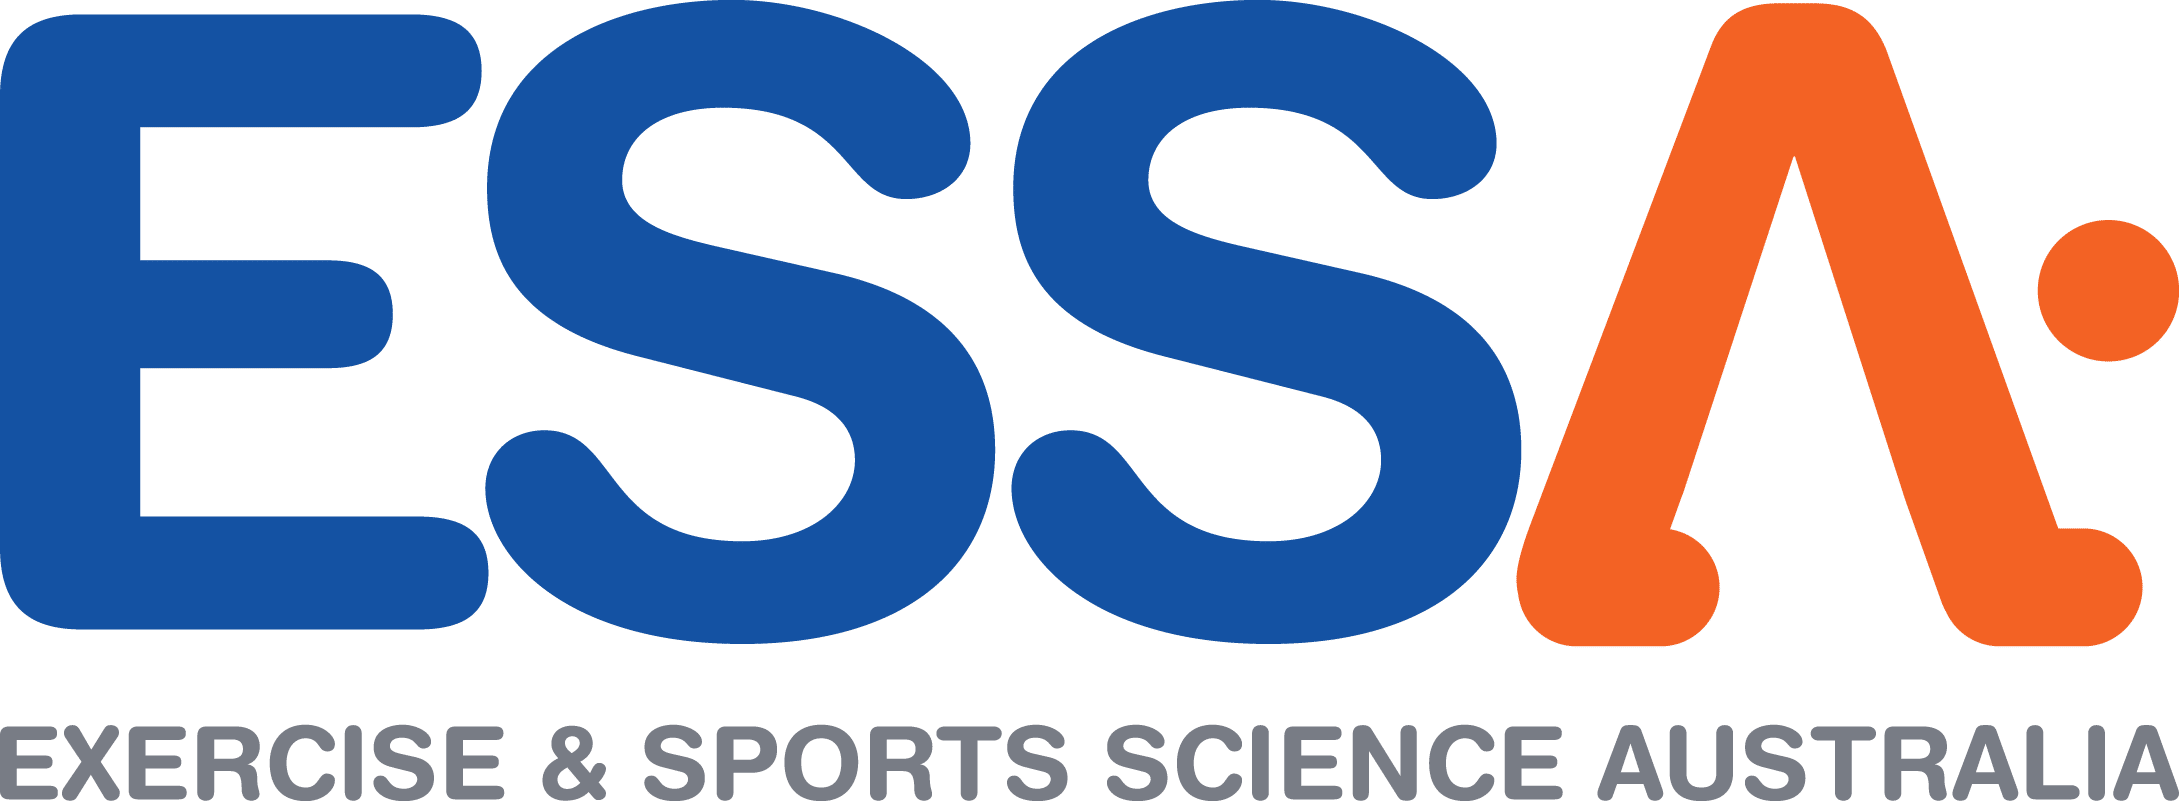 Exercise and sports science Australia logo